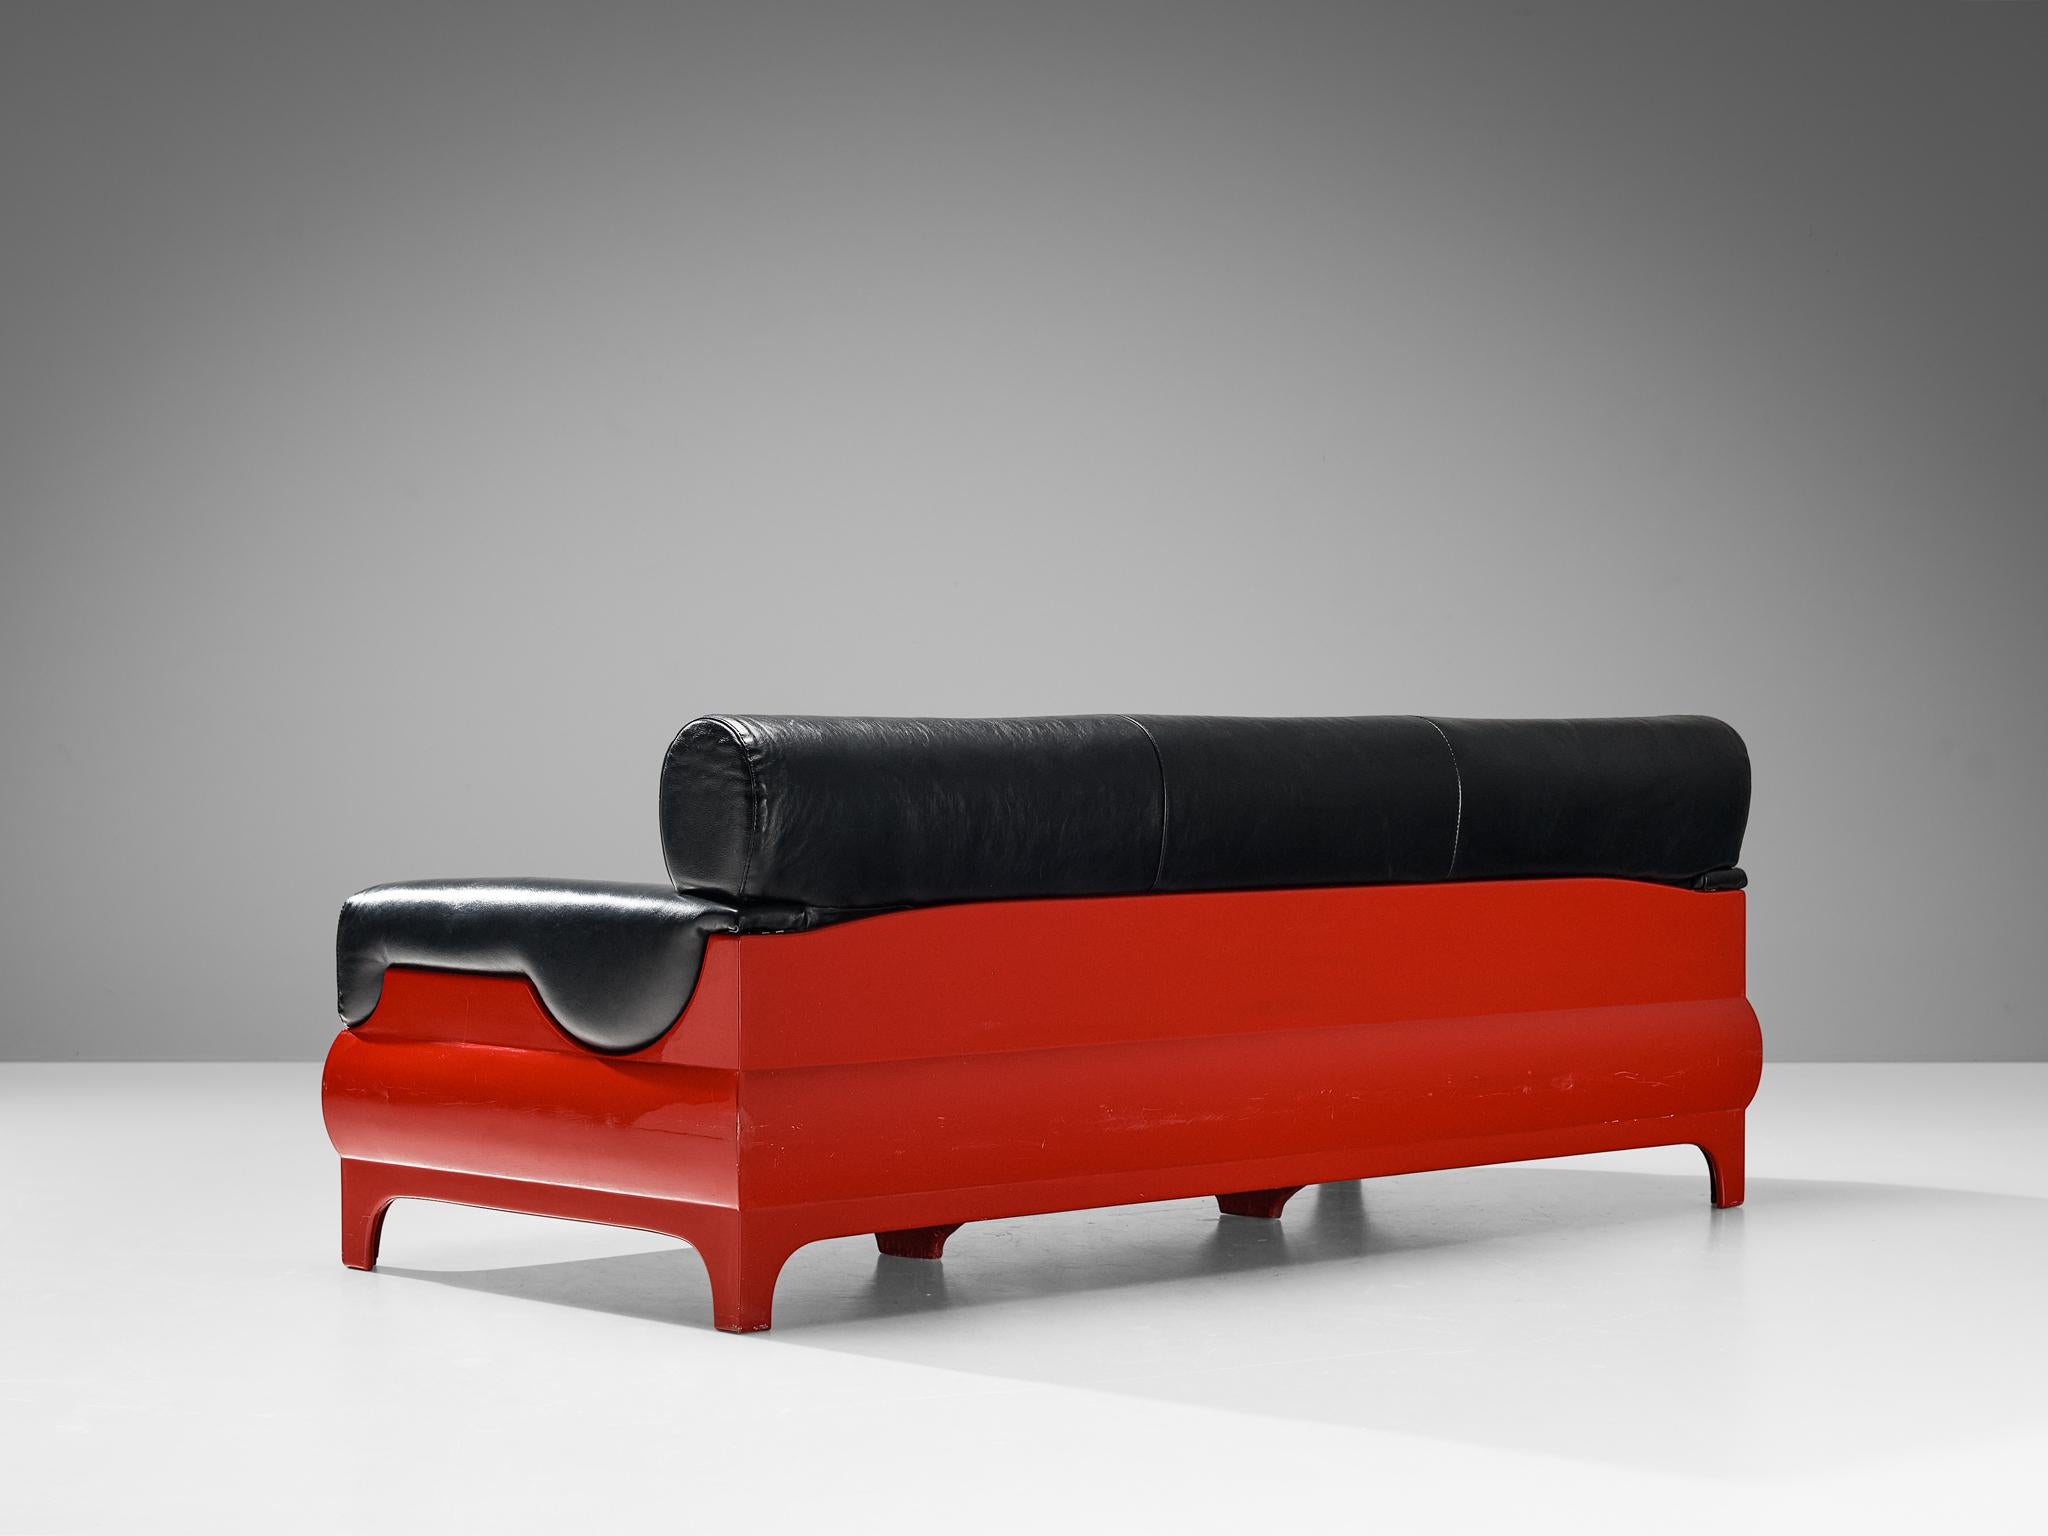 Lemax, sofa, leather, fiberglass, Italy, late 1960s / 1970s

This sofa from Italy is exemplary for the technological advancements and aesthetics of the 1960s and 1970s. The design reflects the company's interest in experimenting with new materials